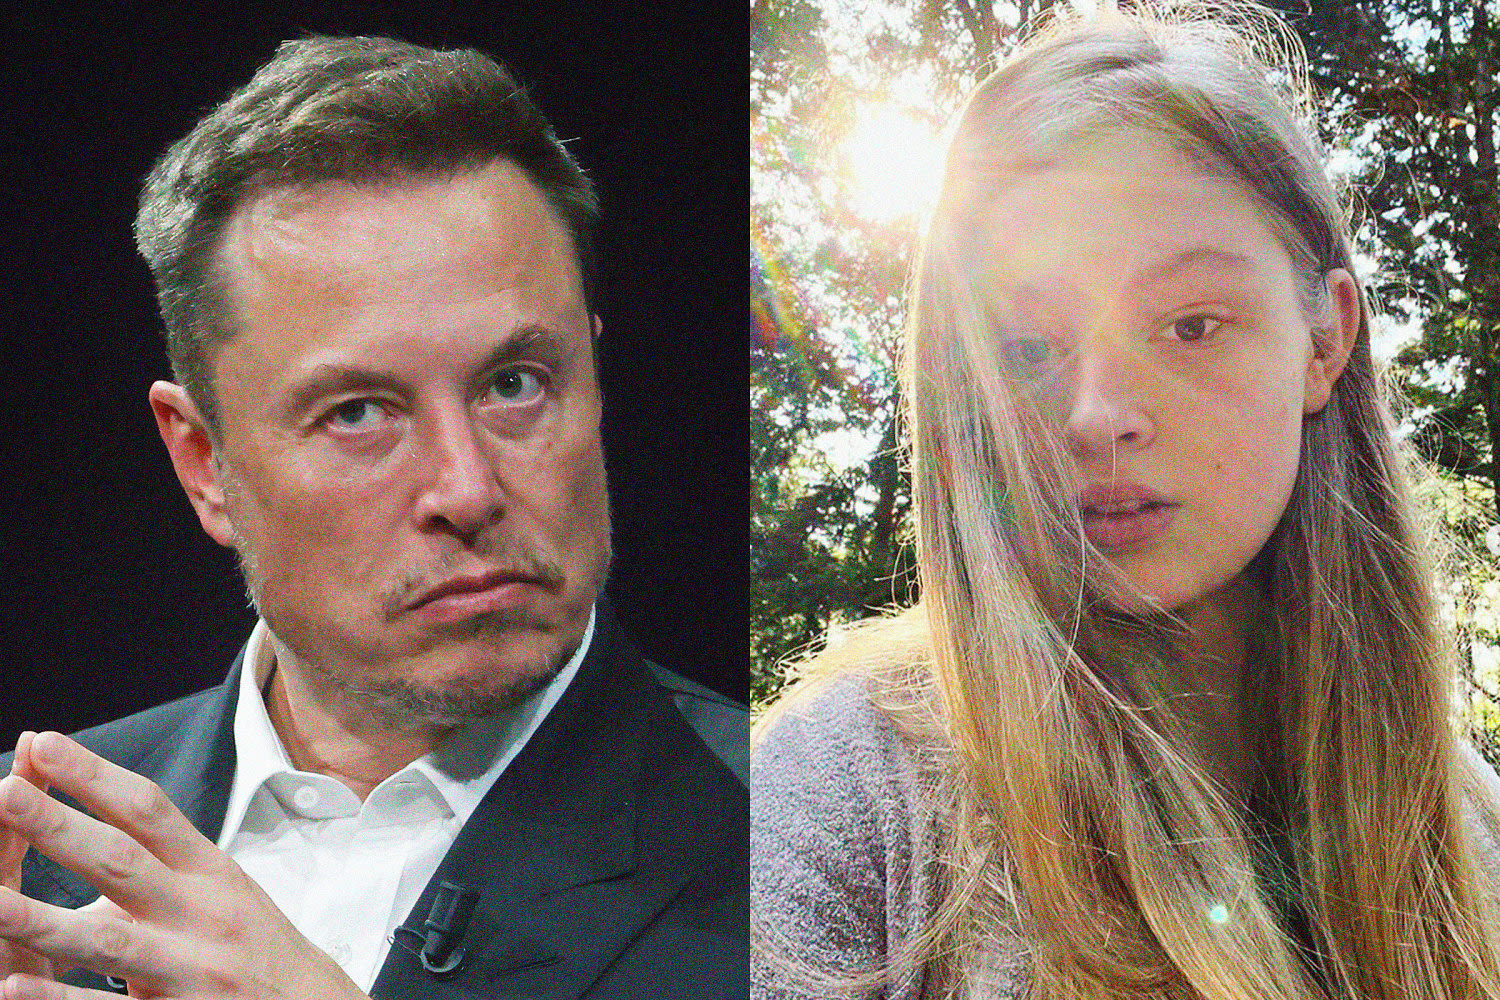 Elon Musk’s transgender daughter, in first interview, says he berated her for being queer as a child